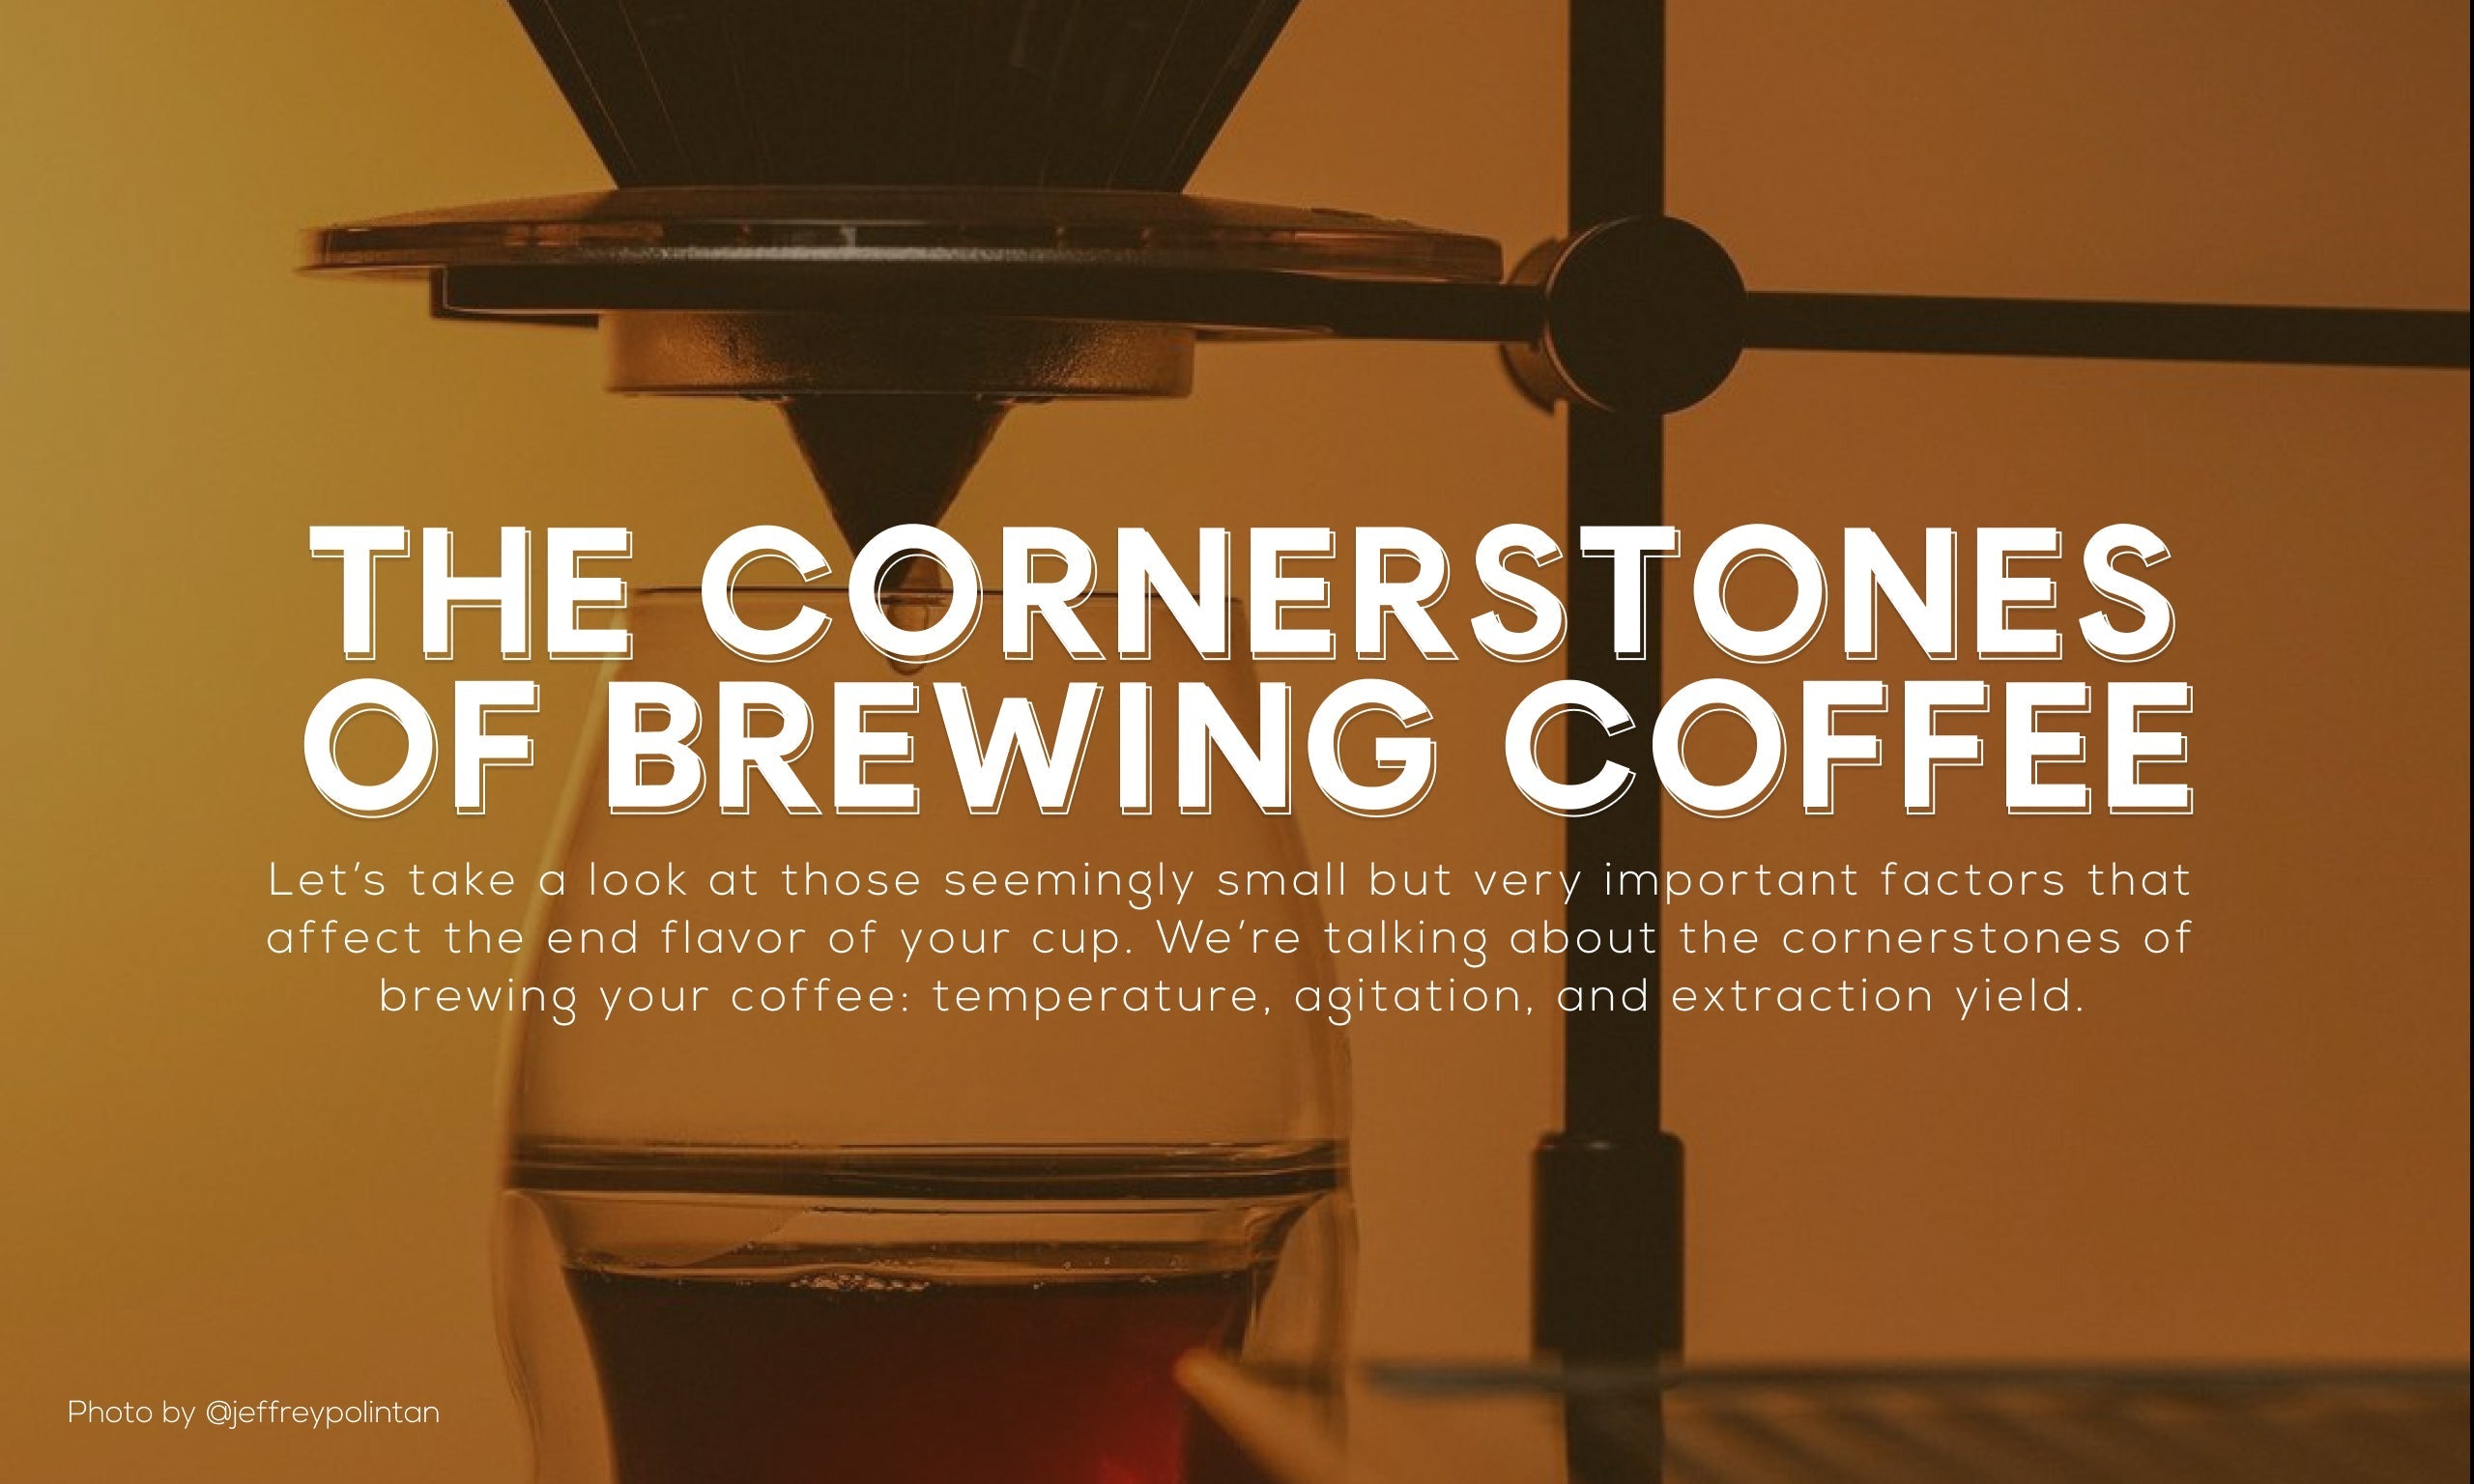 Cornerstones of Brewing Coffee: Temperature, Agitation, and Extraction